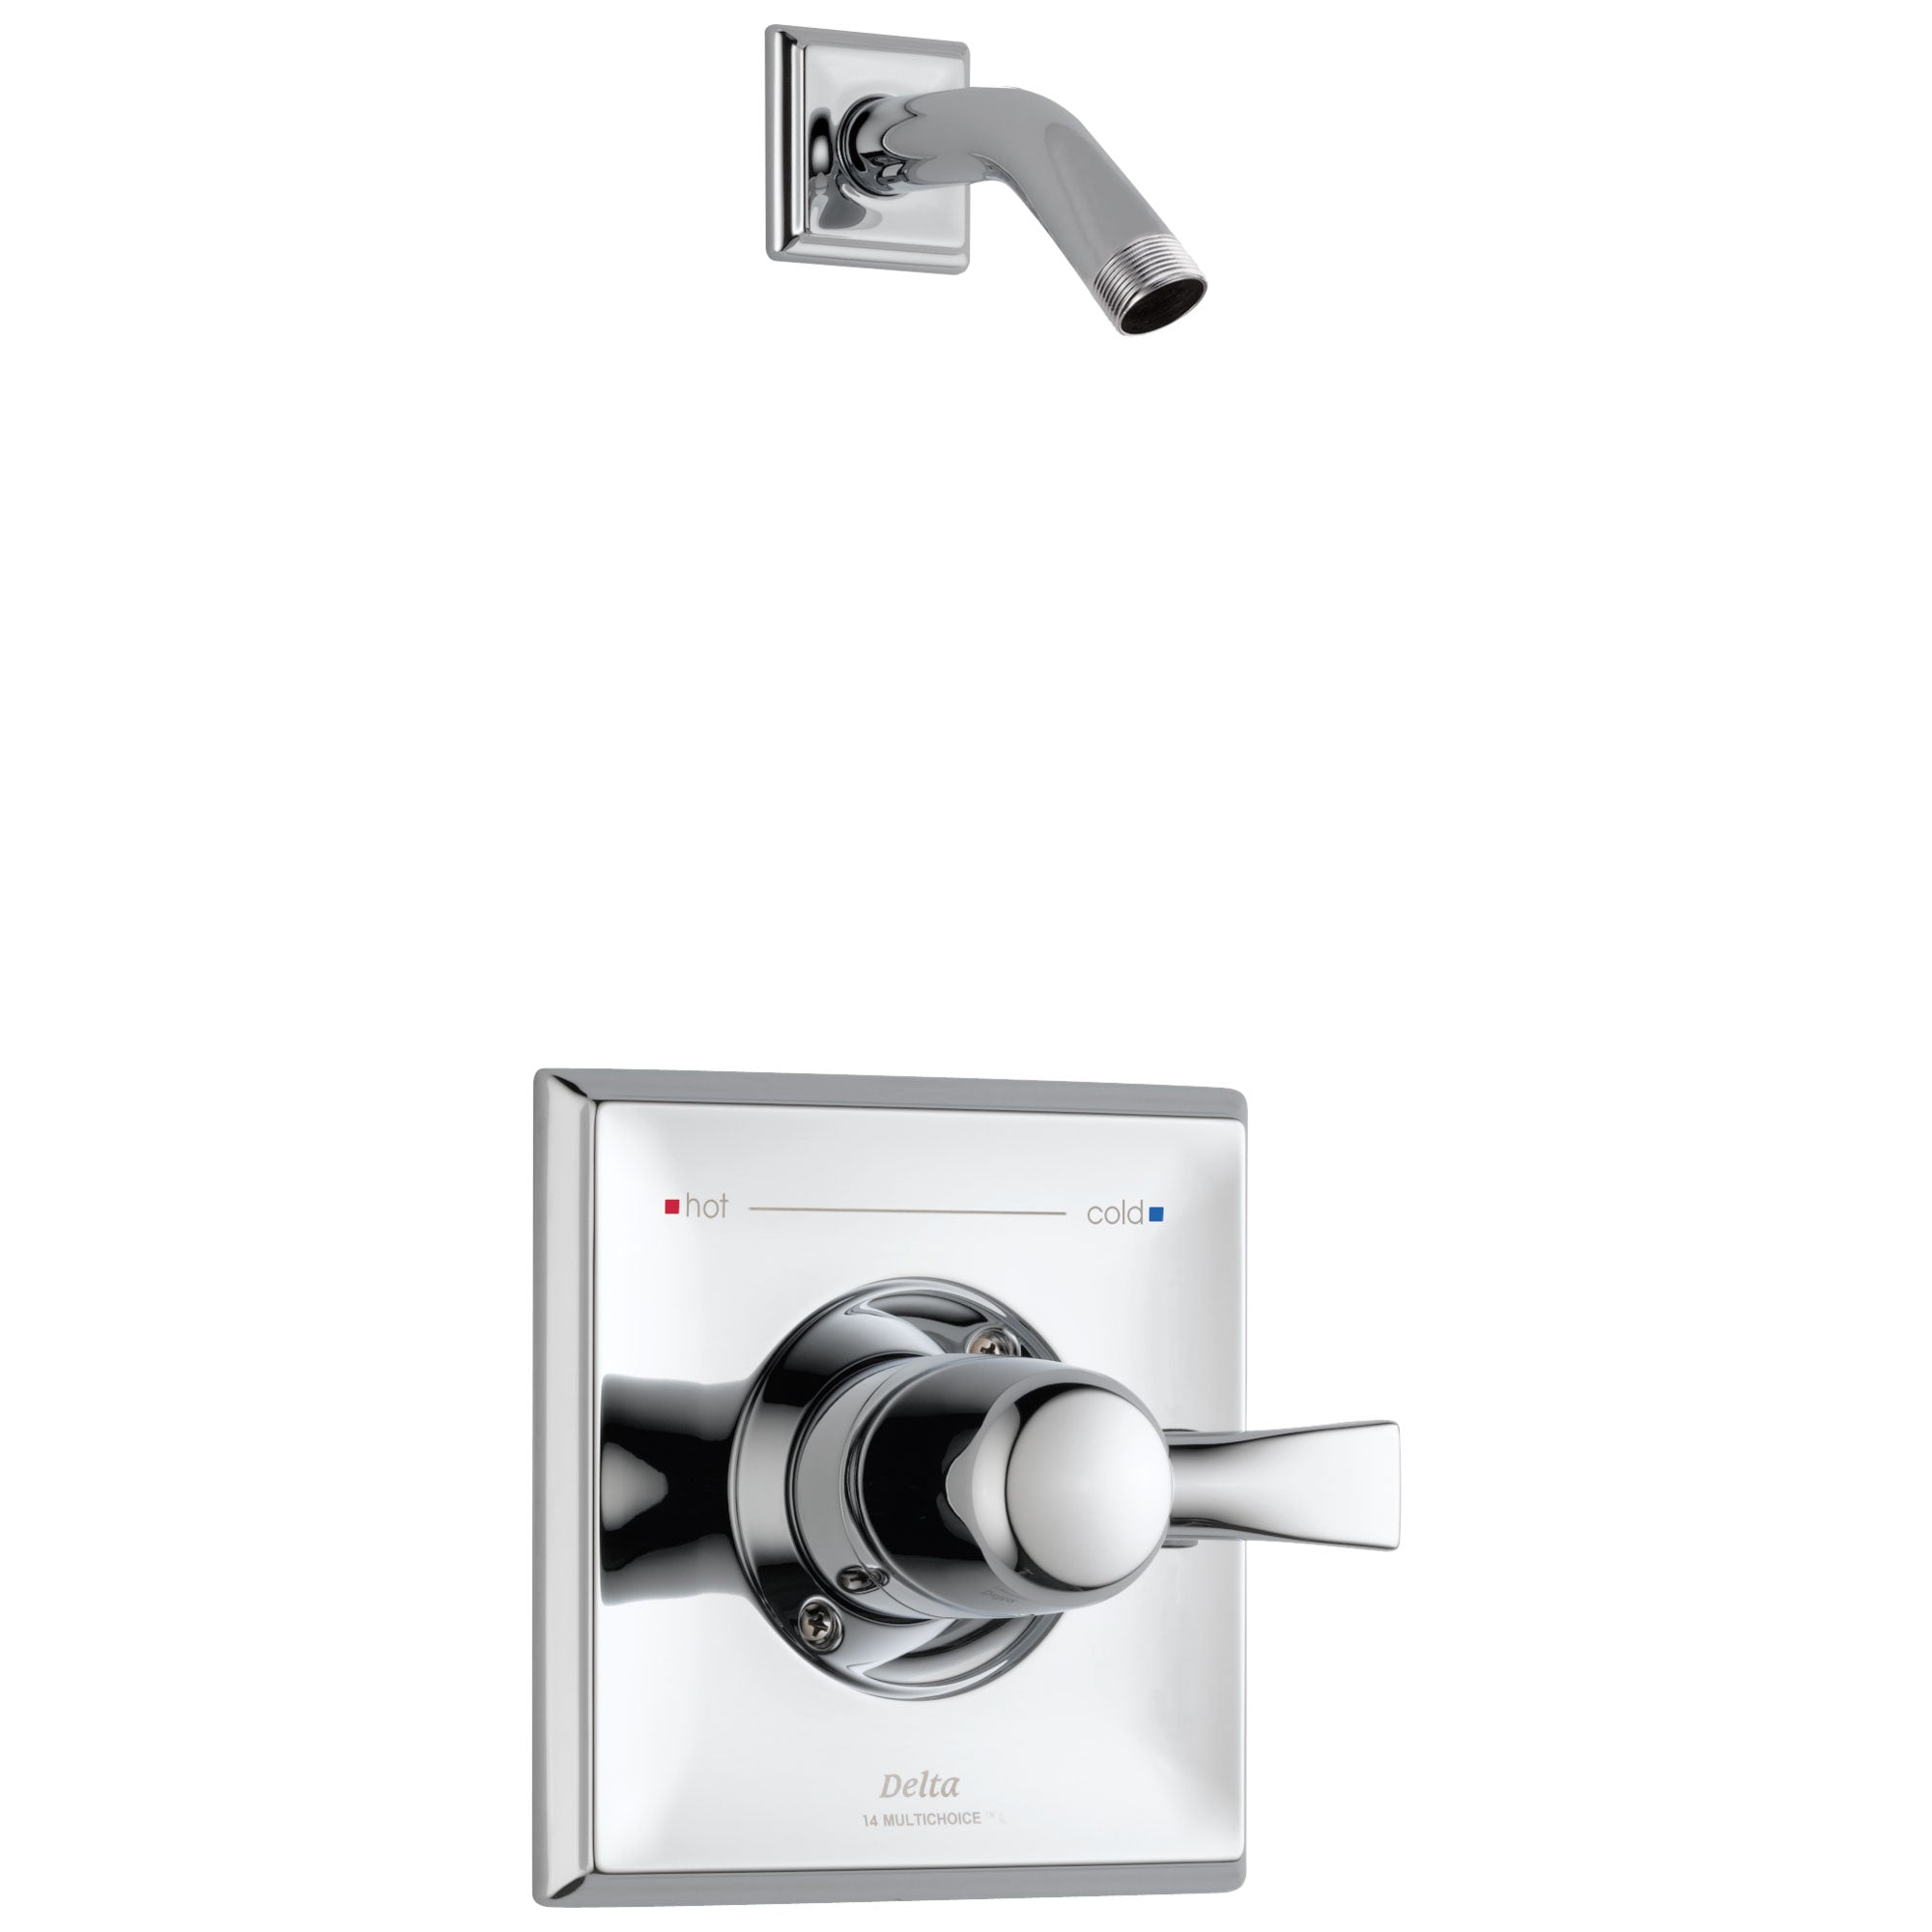 Delta Dryden Collection Chrome Finish Monitor 14 Series Stylish One Handle Shower only Faucet Trim Kit - Less Showerhead Includes Valve without Stops D2475V